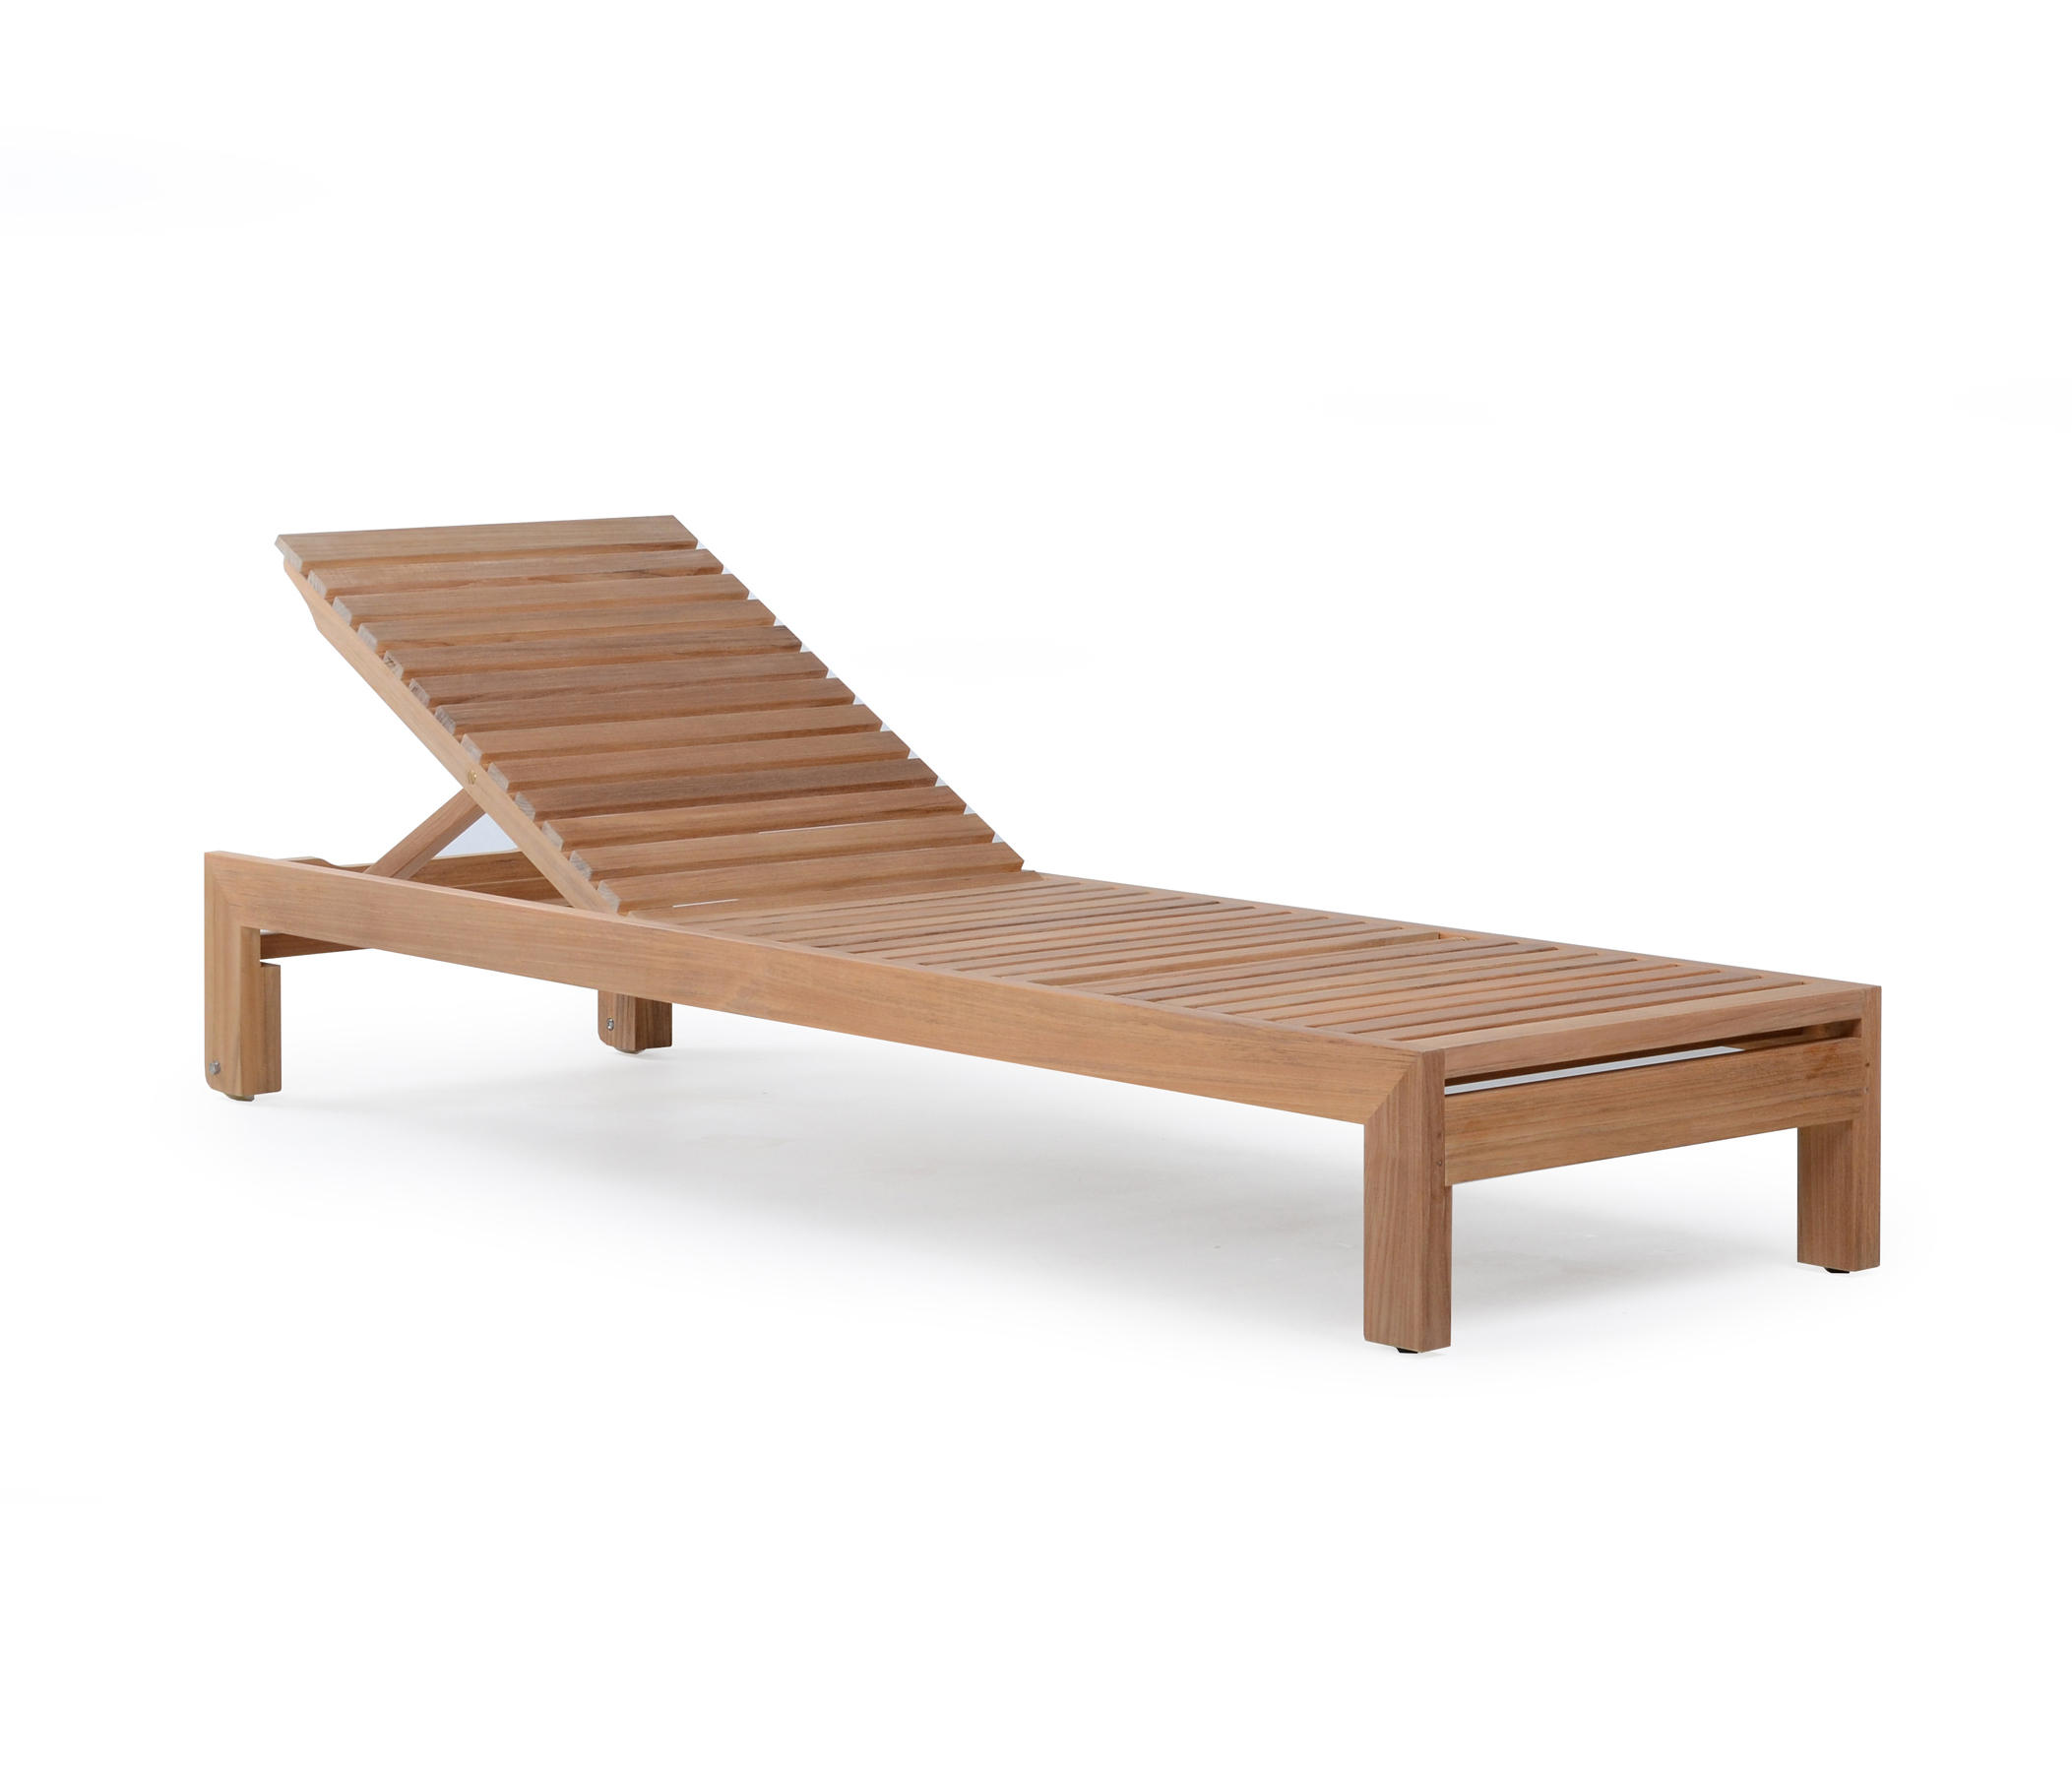 AZURE LOUNGER - Sun loungers from Wintons Teak | Architonic